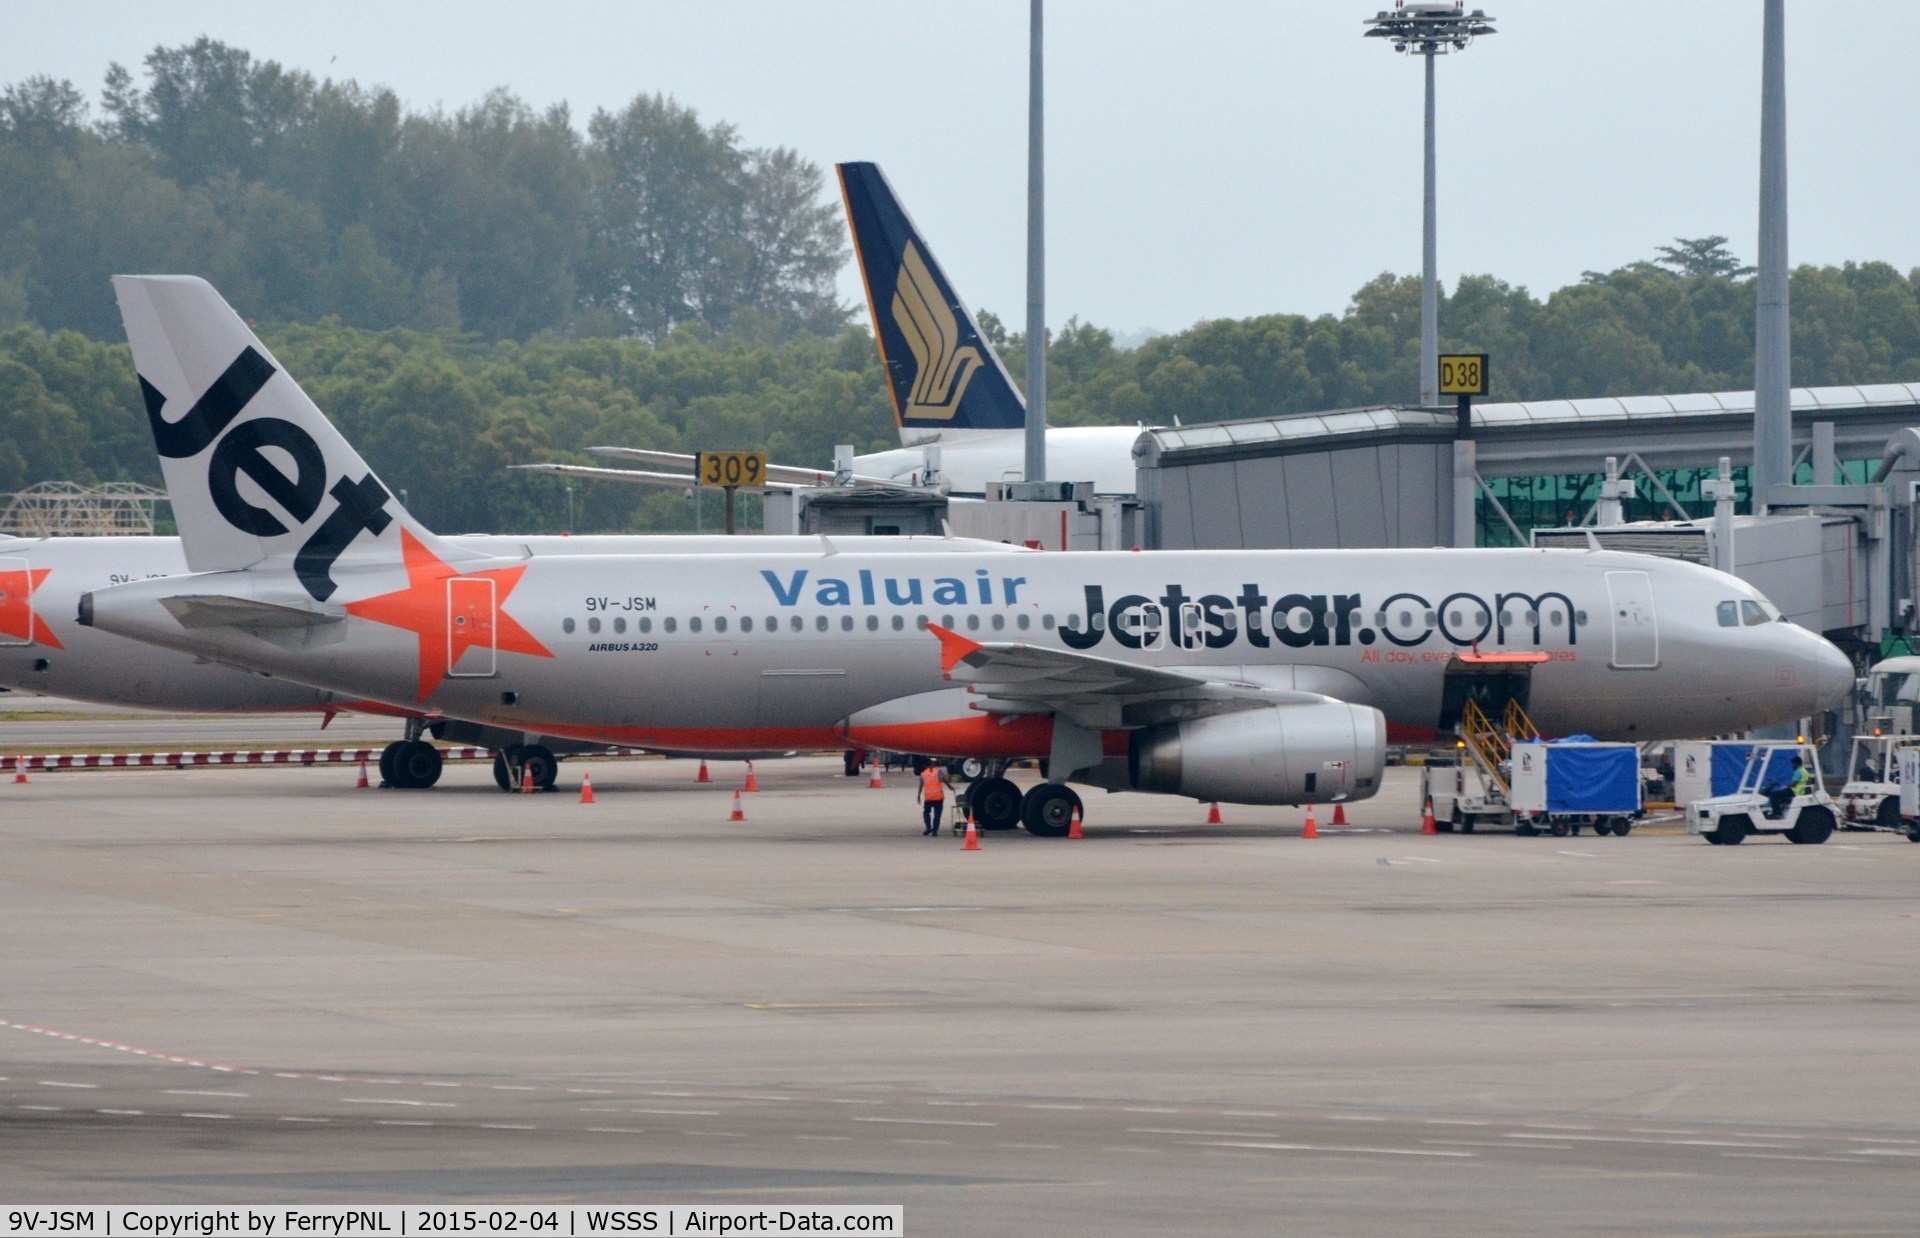 9V-JSM, 2011 Airbus A320-232 C/N 4872, Jetstar Asia A320 at its gate in SIN